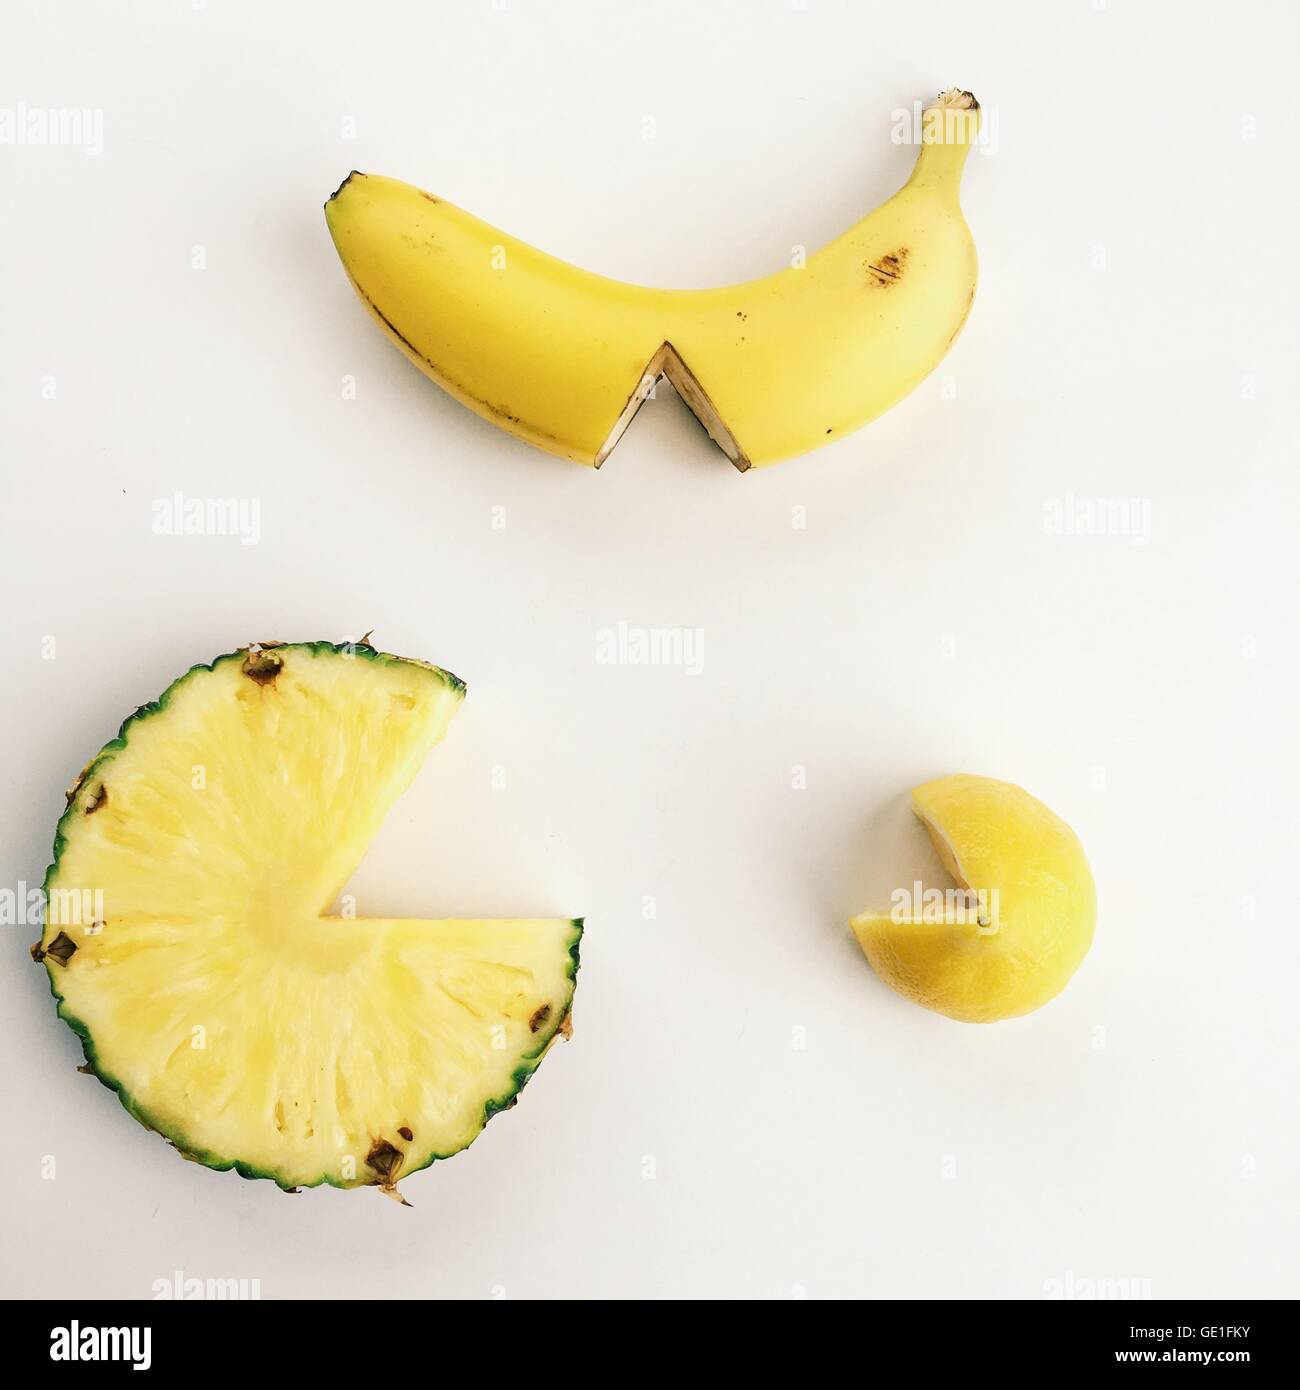 Fruit with wedge sections missing Stock Photo